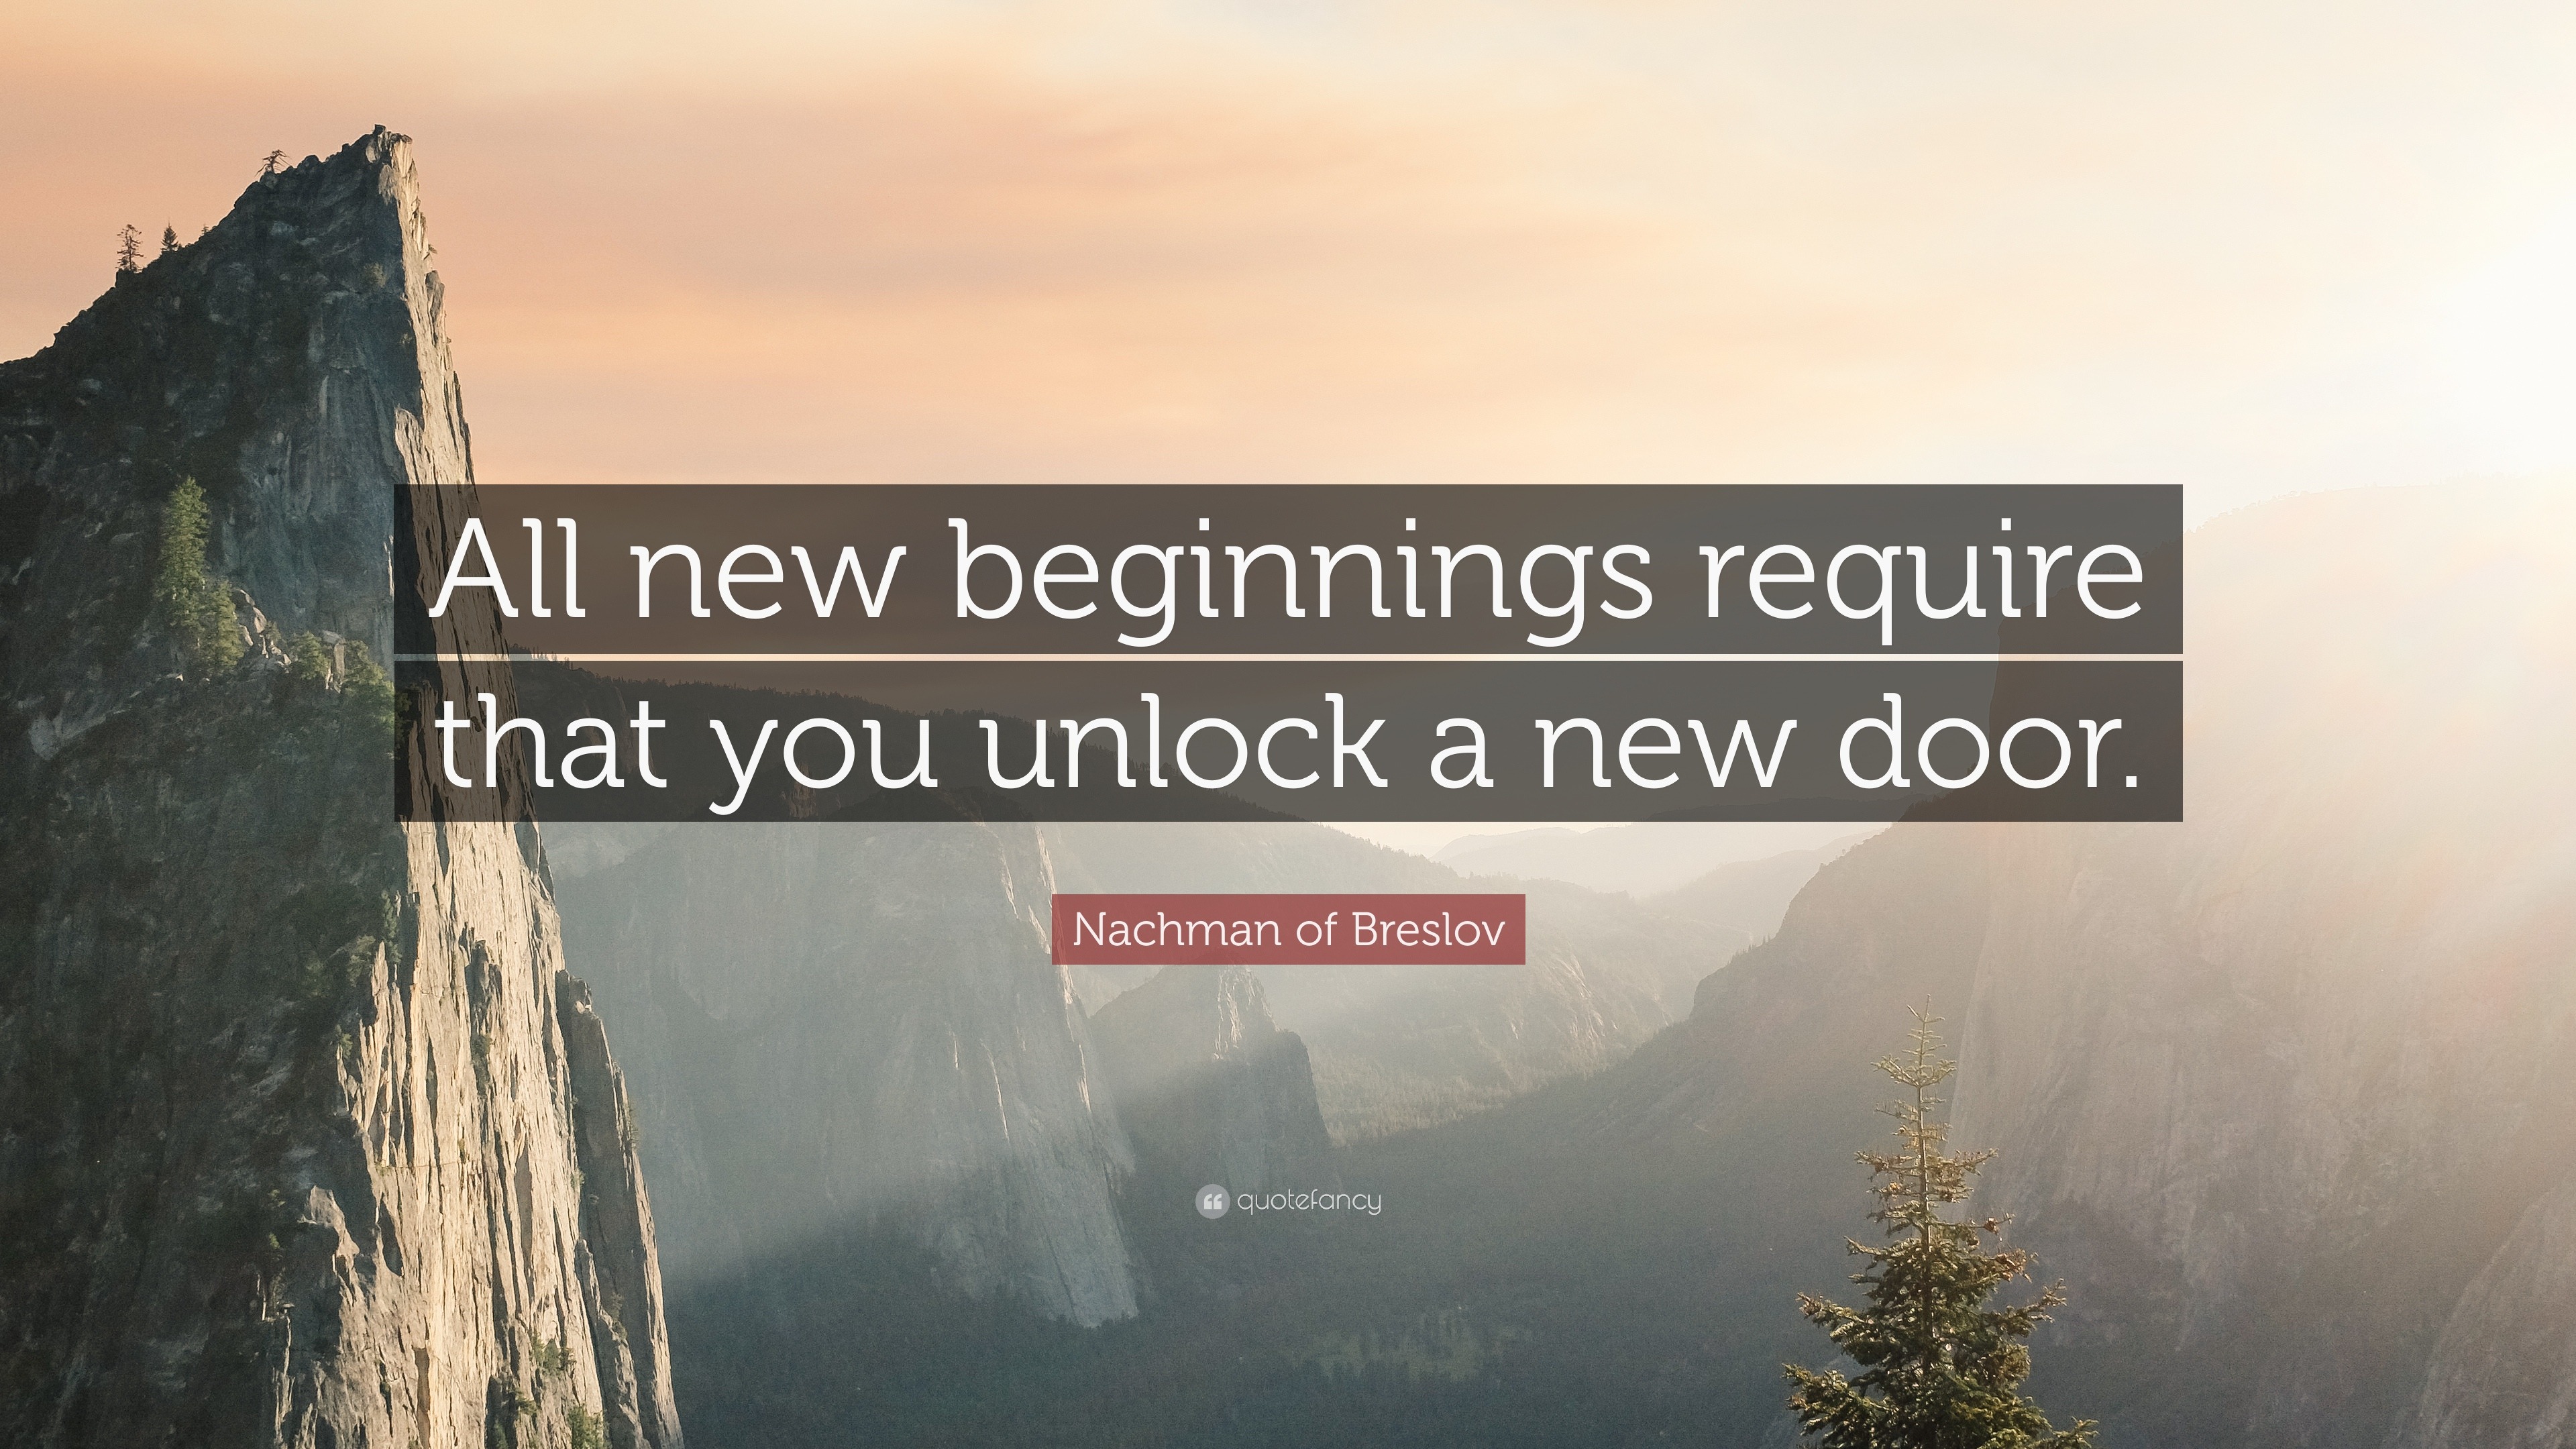 Nachman of Breslov Quote: “All new beginnings require that you